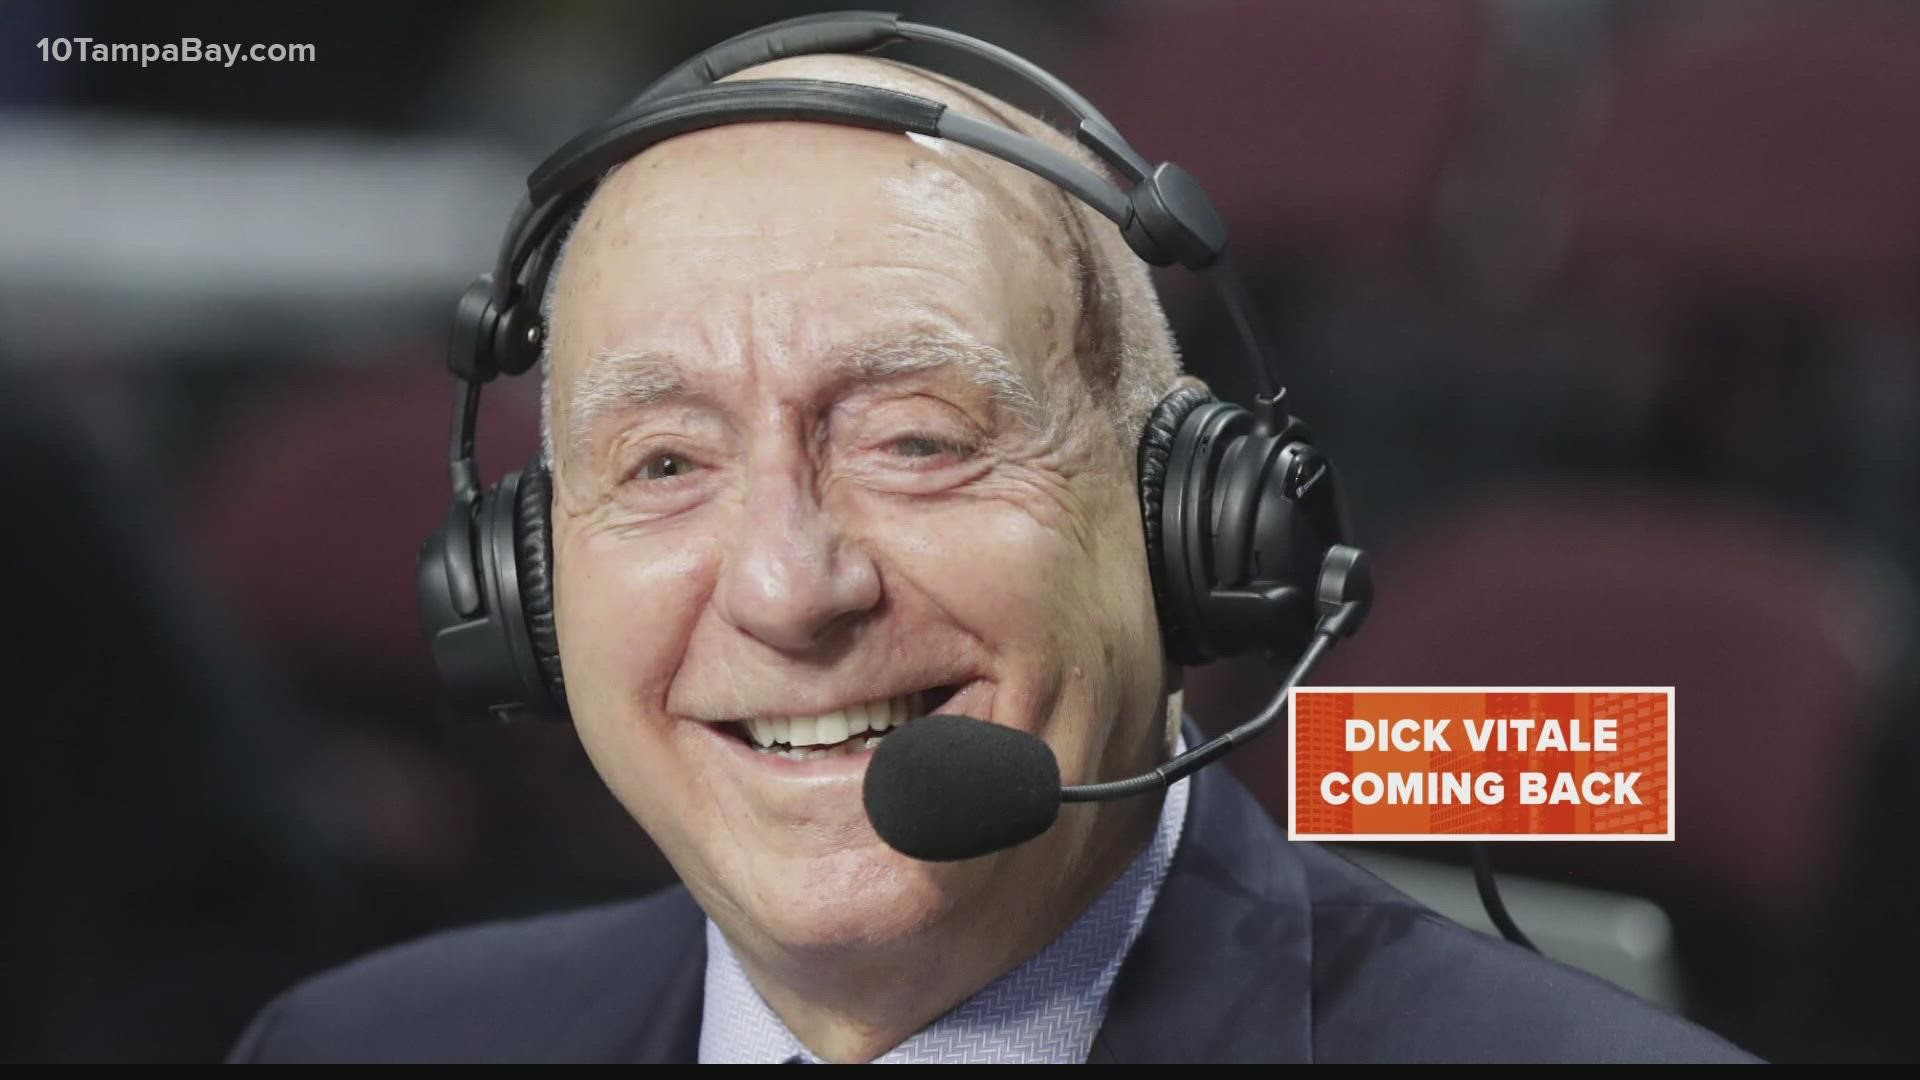 The longtime ESPN broadcaster recently announced he was diagnosed with cancer for the second time in months.